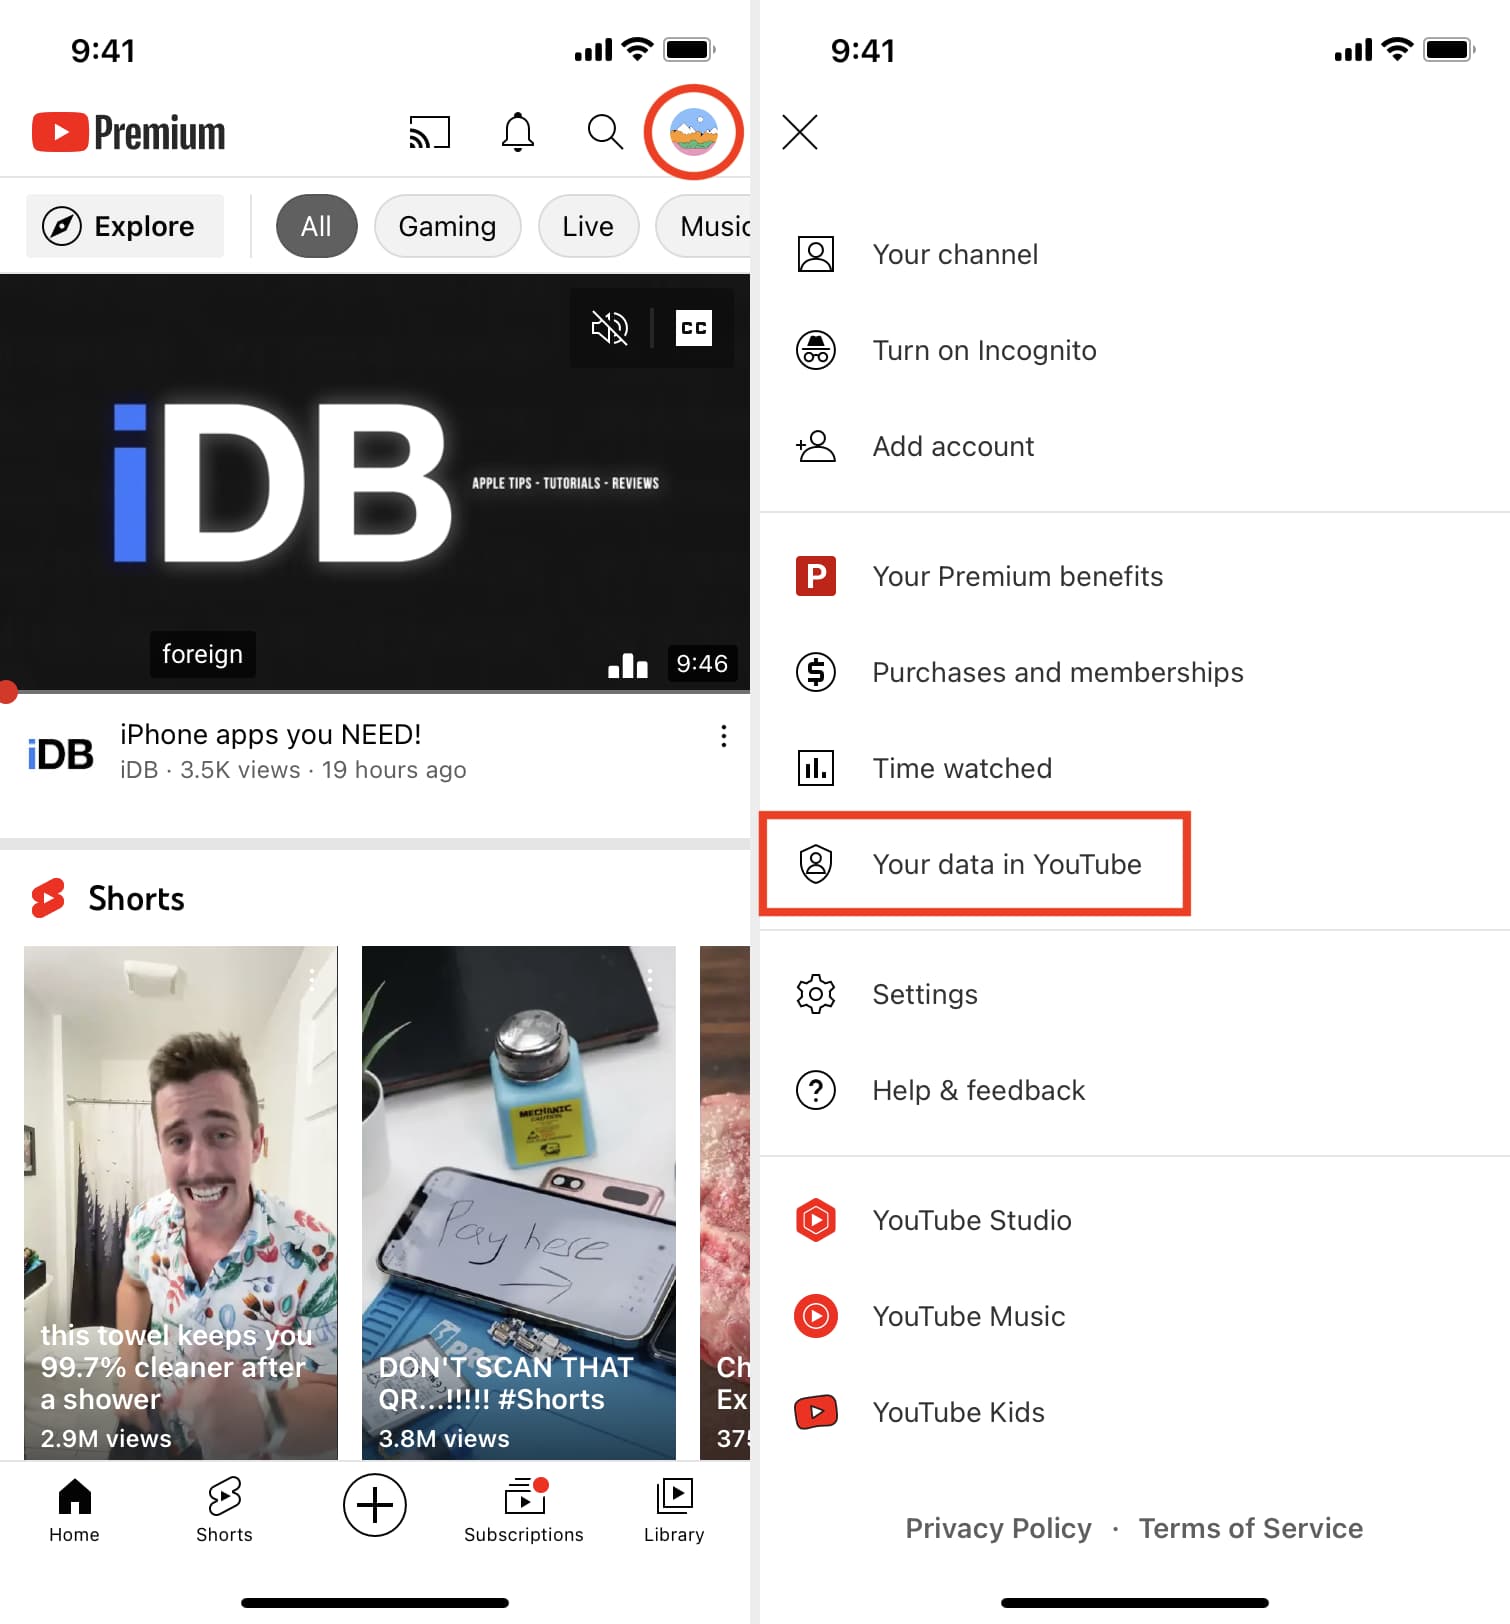 Access your data in YouTube